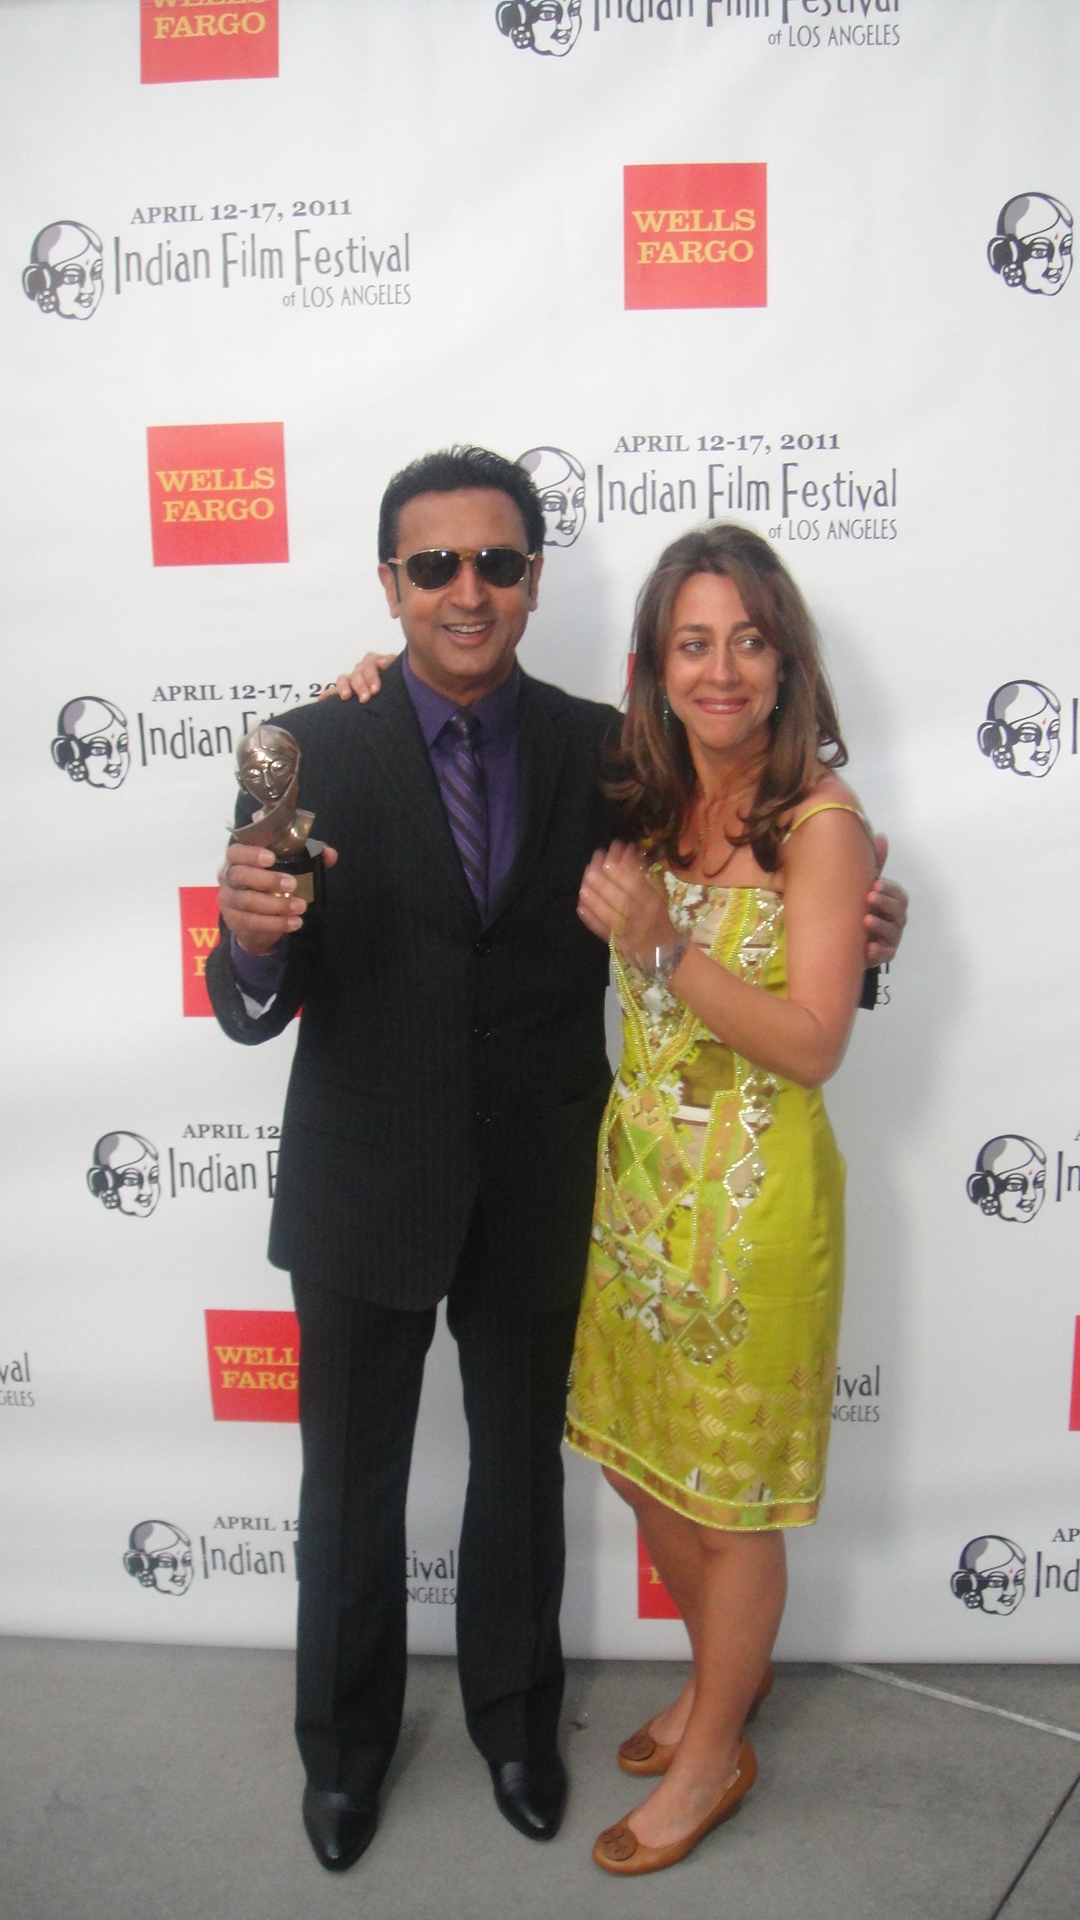 Gulshan Grover After receiving Best Actor Award at Los Angeles Film Festival with Christina Marouda, Festival Director